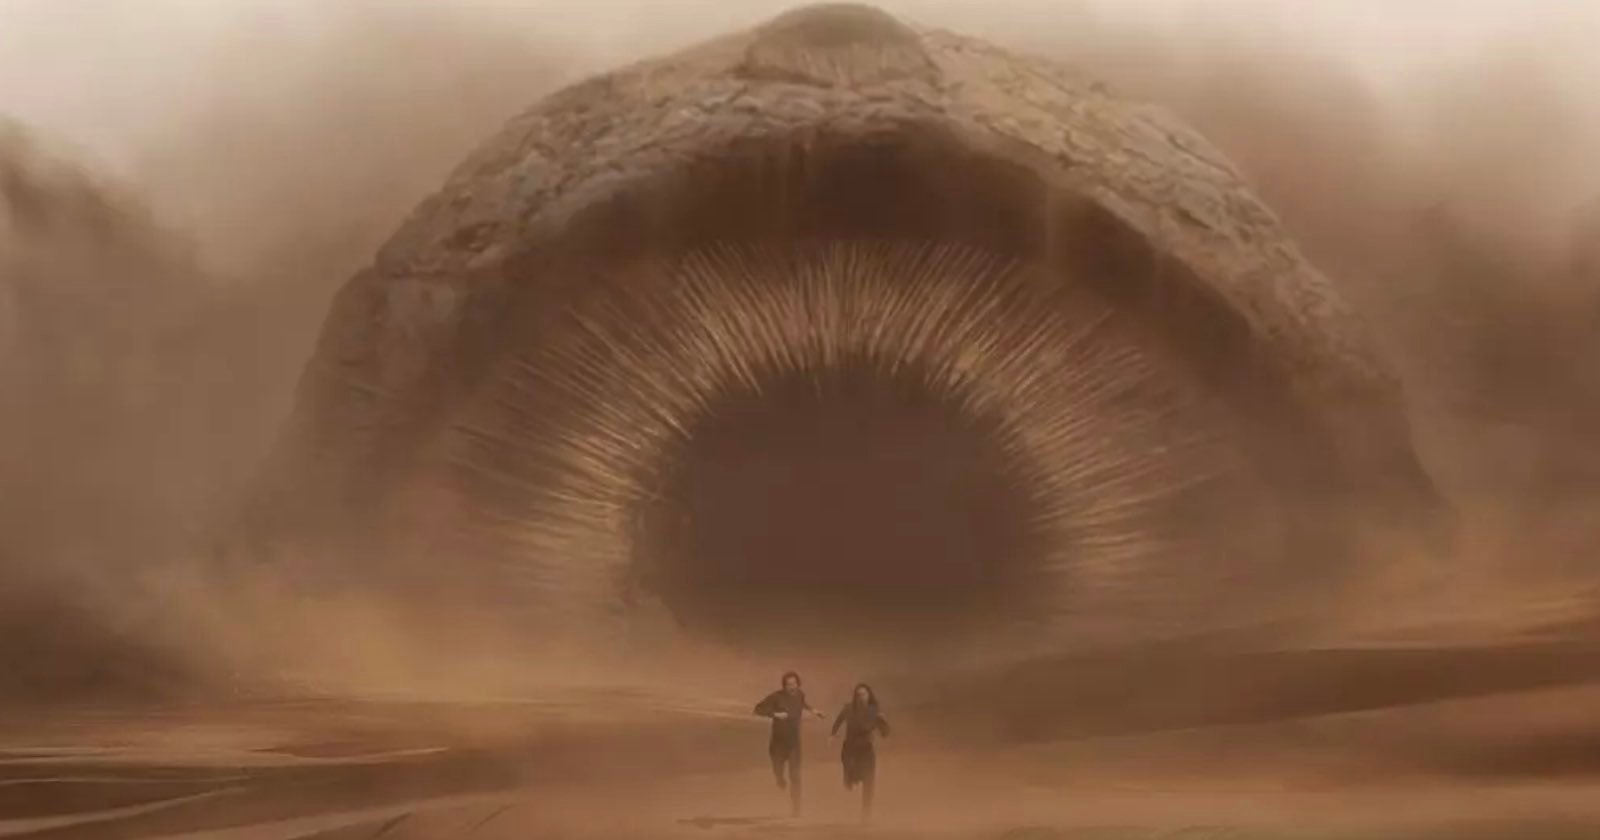 Paul Atreides (Timothee Chalamet) and his mother Lady Jessica (Rebecca Ferguson), run away from a huge sandworm in "Dune"